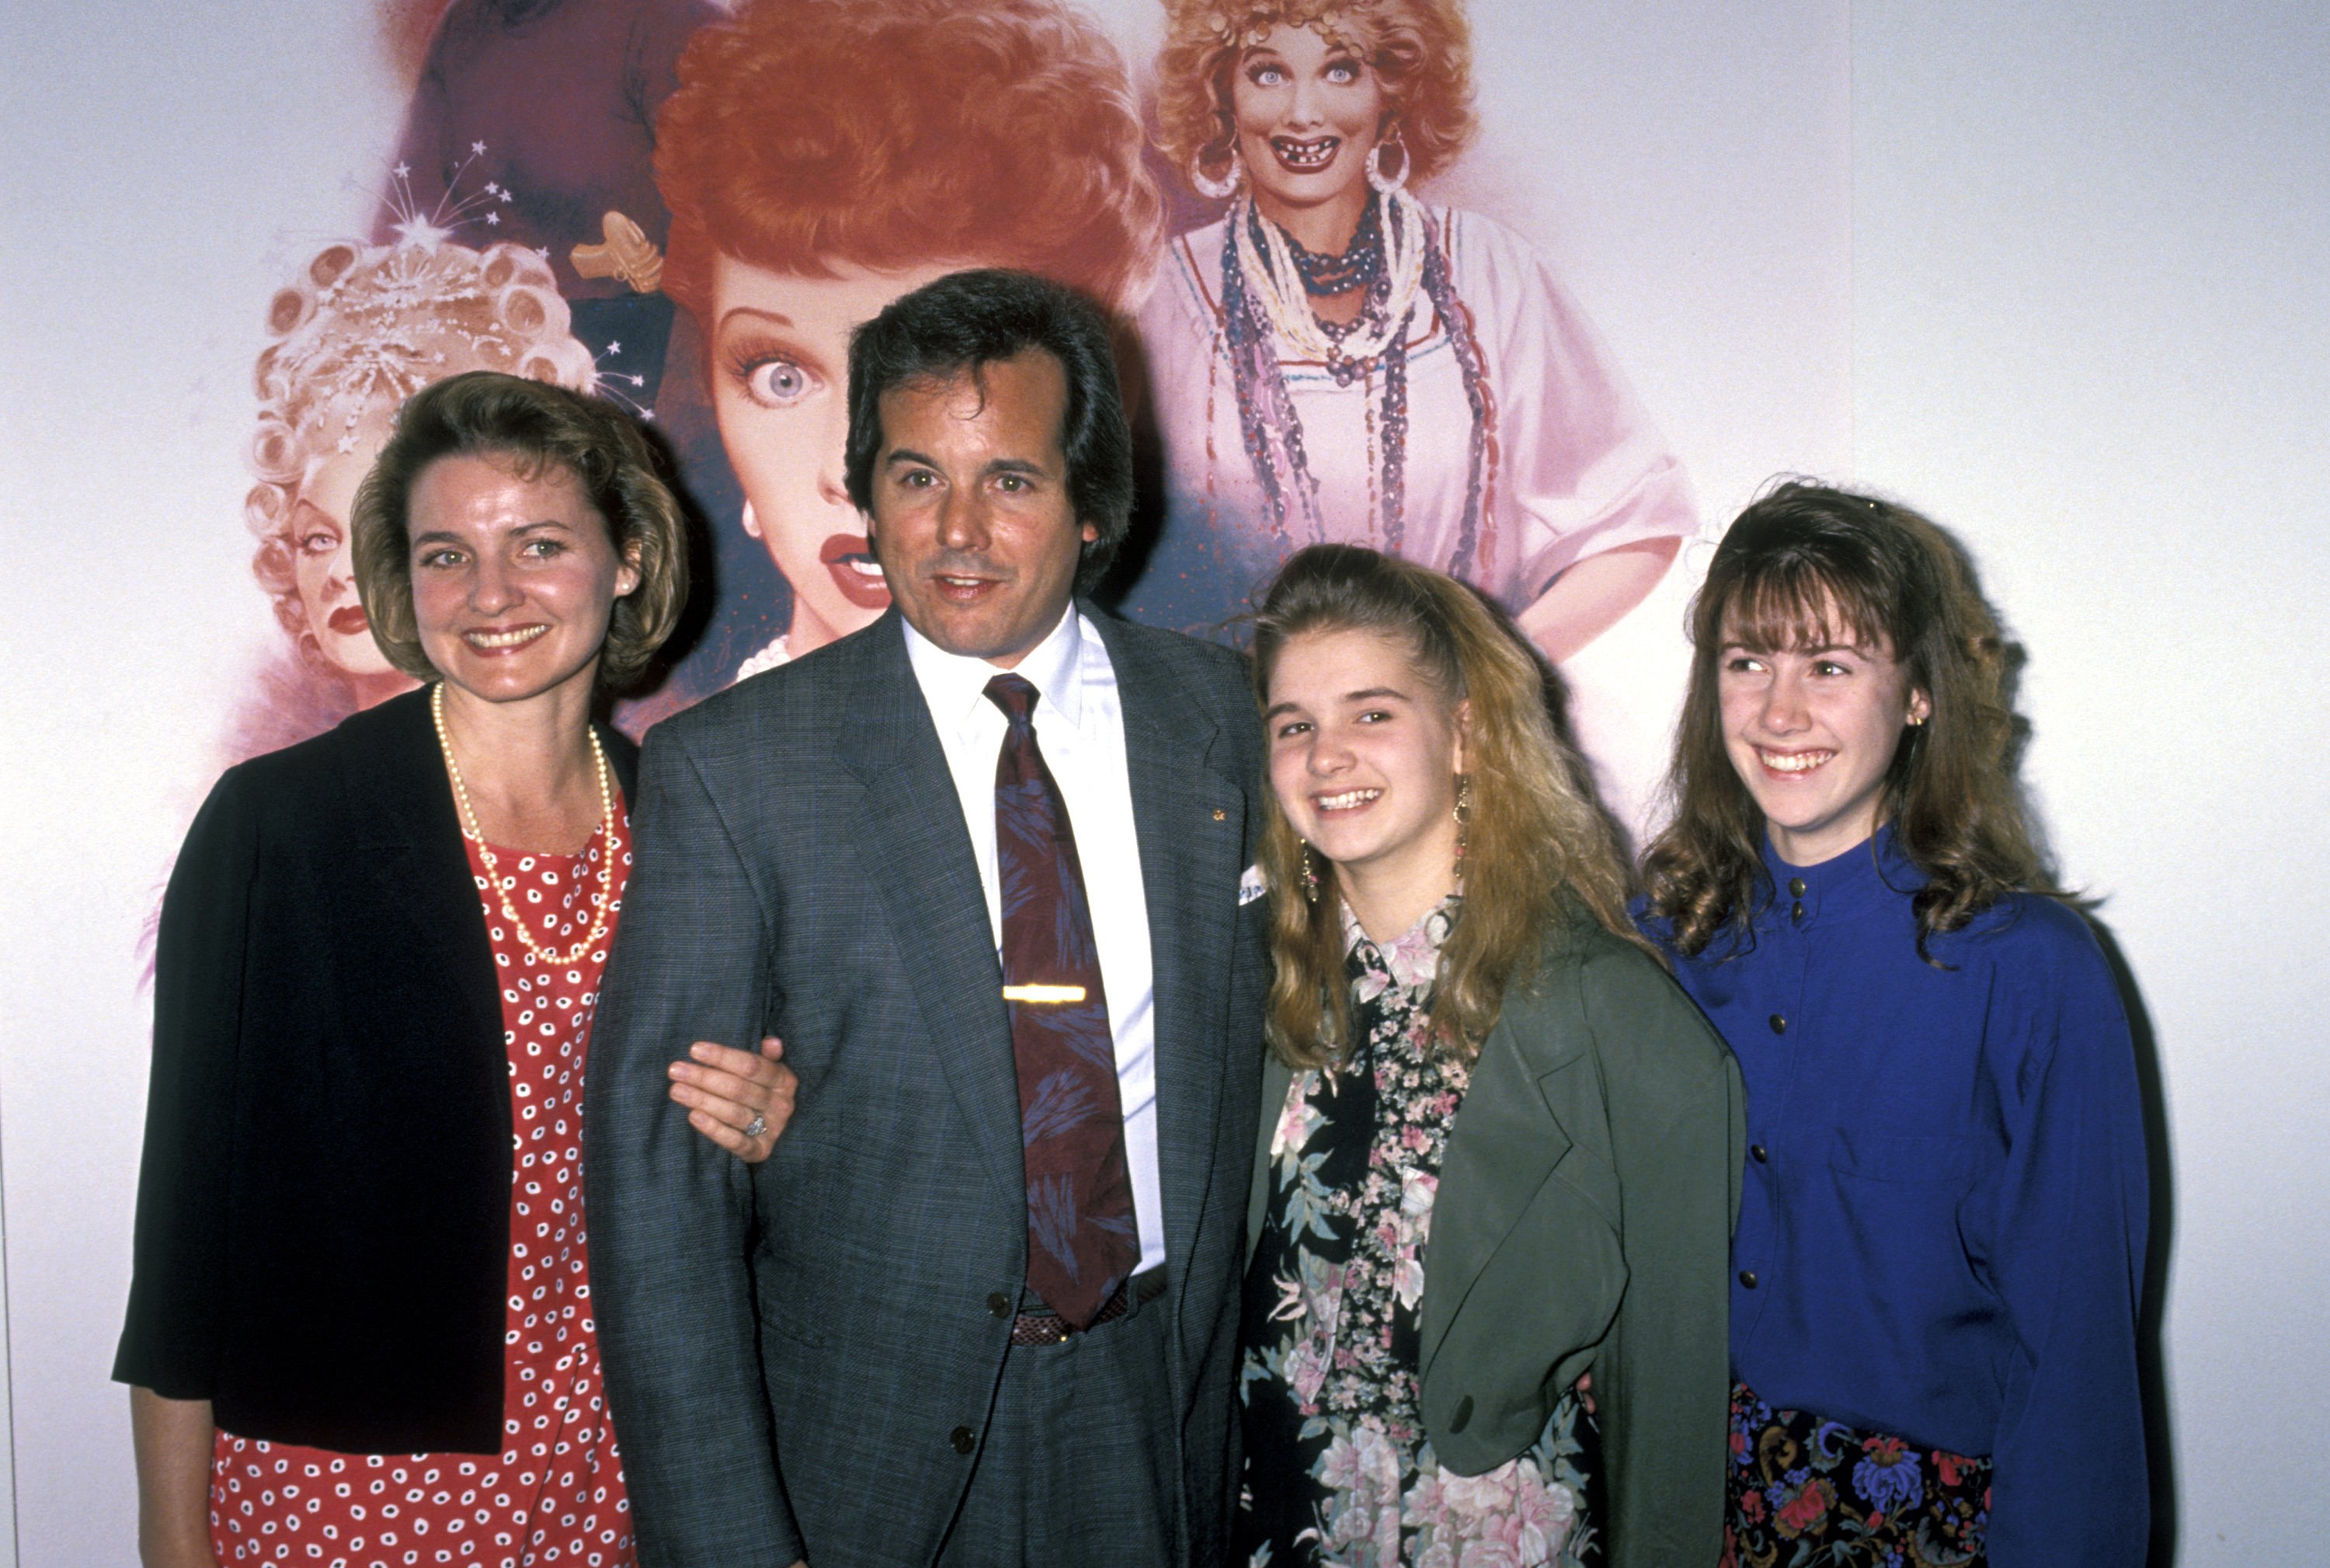 Amy Arnaz, Desi Arnaz Jr., Haley Arnaz and Nichole Arnaz during "Lucy" A Tribute to Lucille Ball. | Source: Getty Images